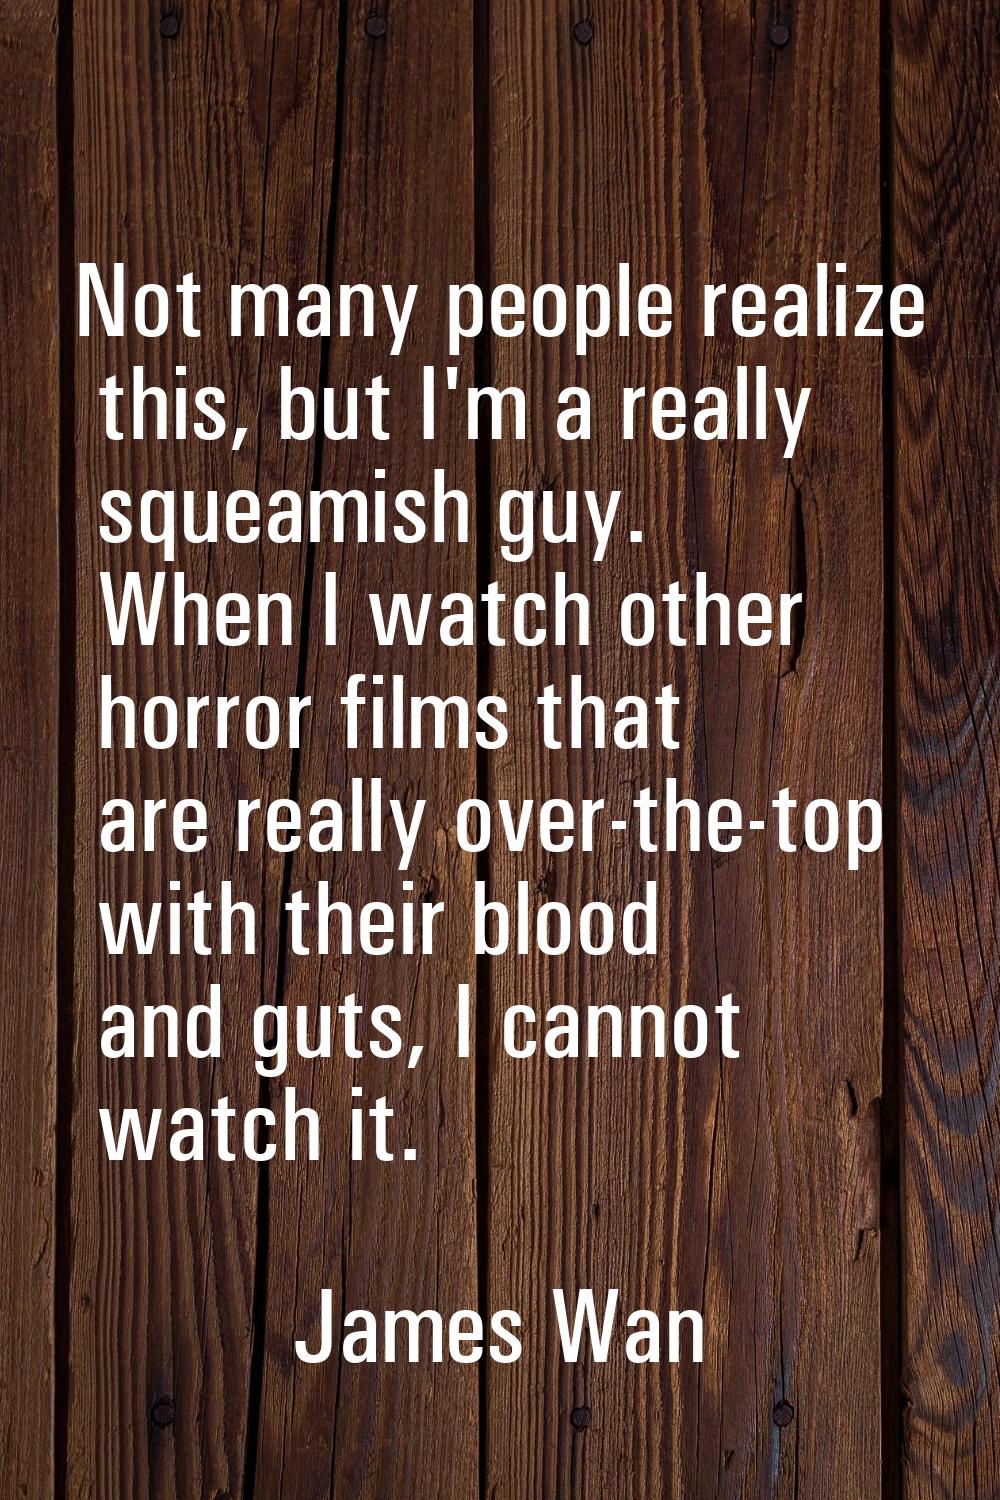 Not many people realize this, but I'm a really squeamish guy. When I watch other horror films that 